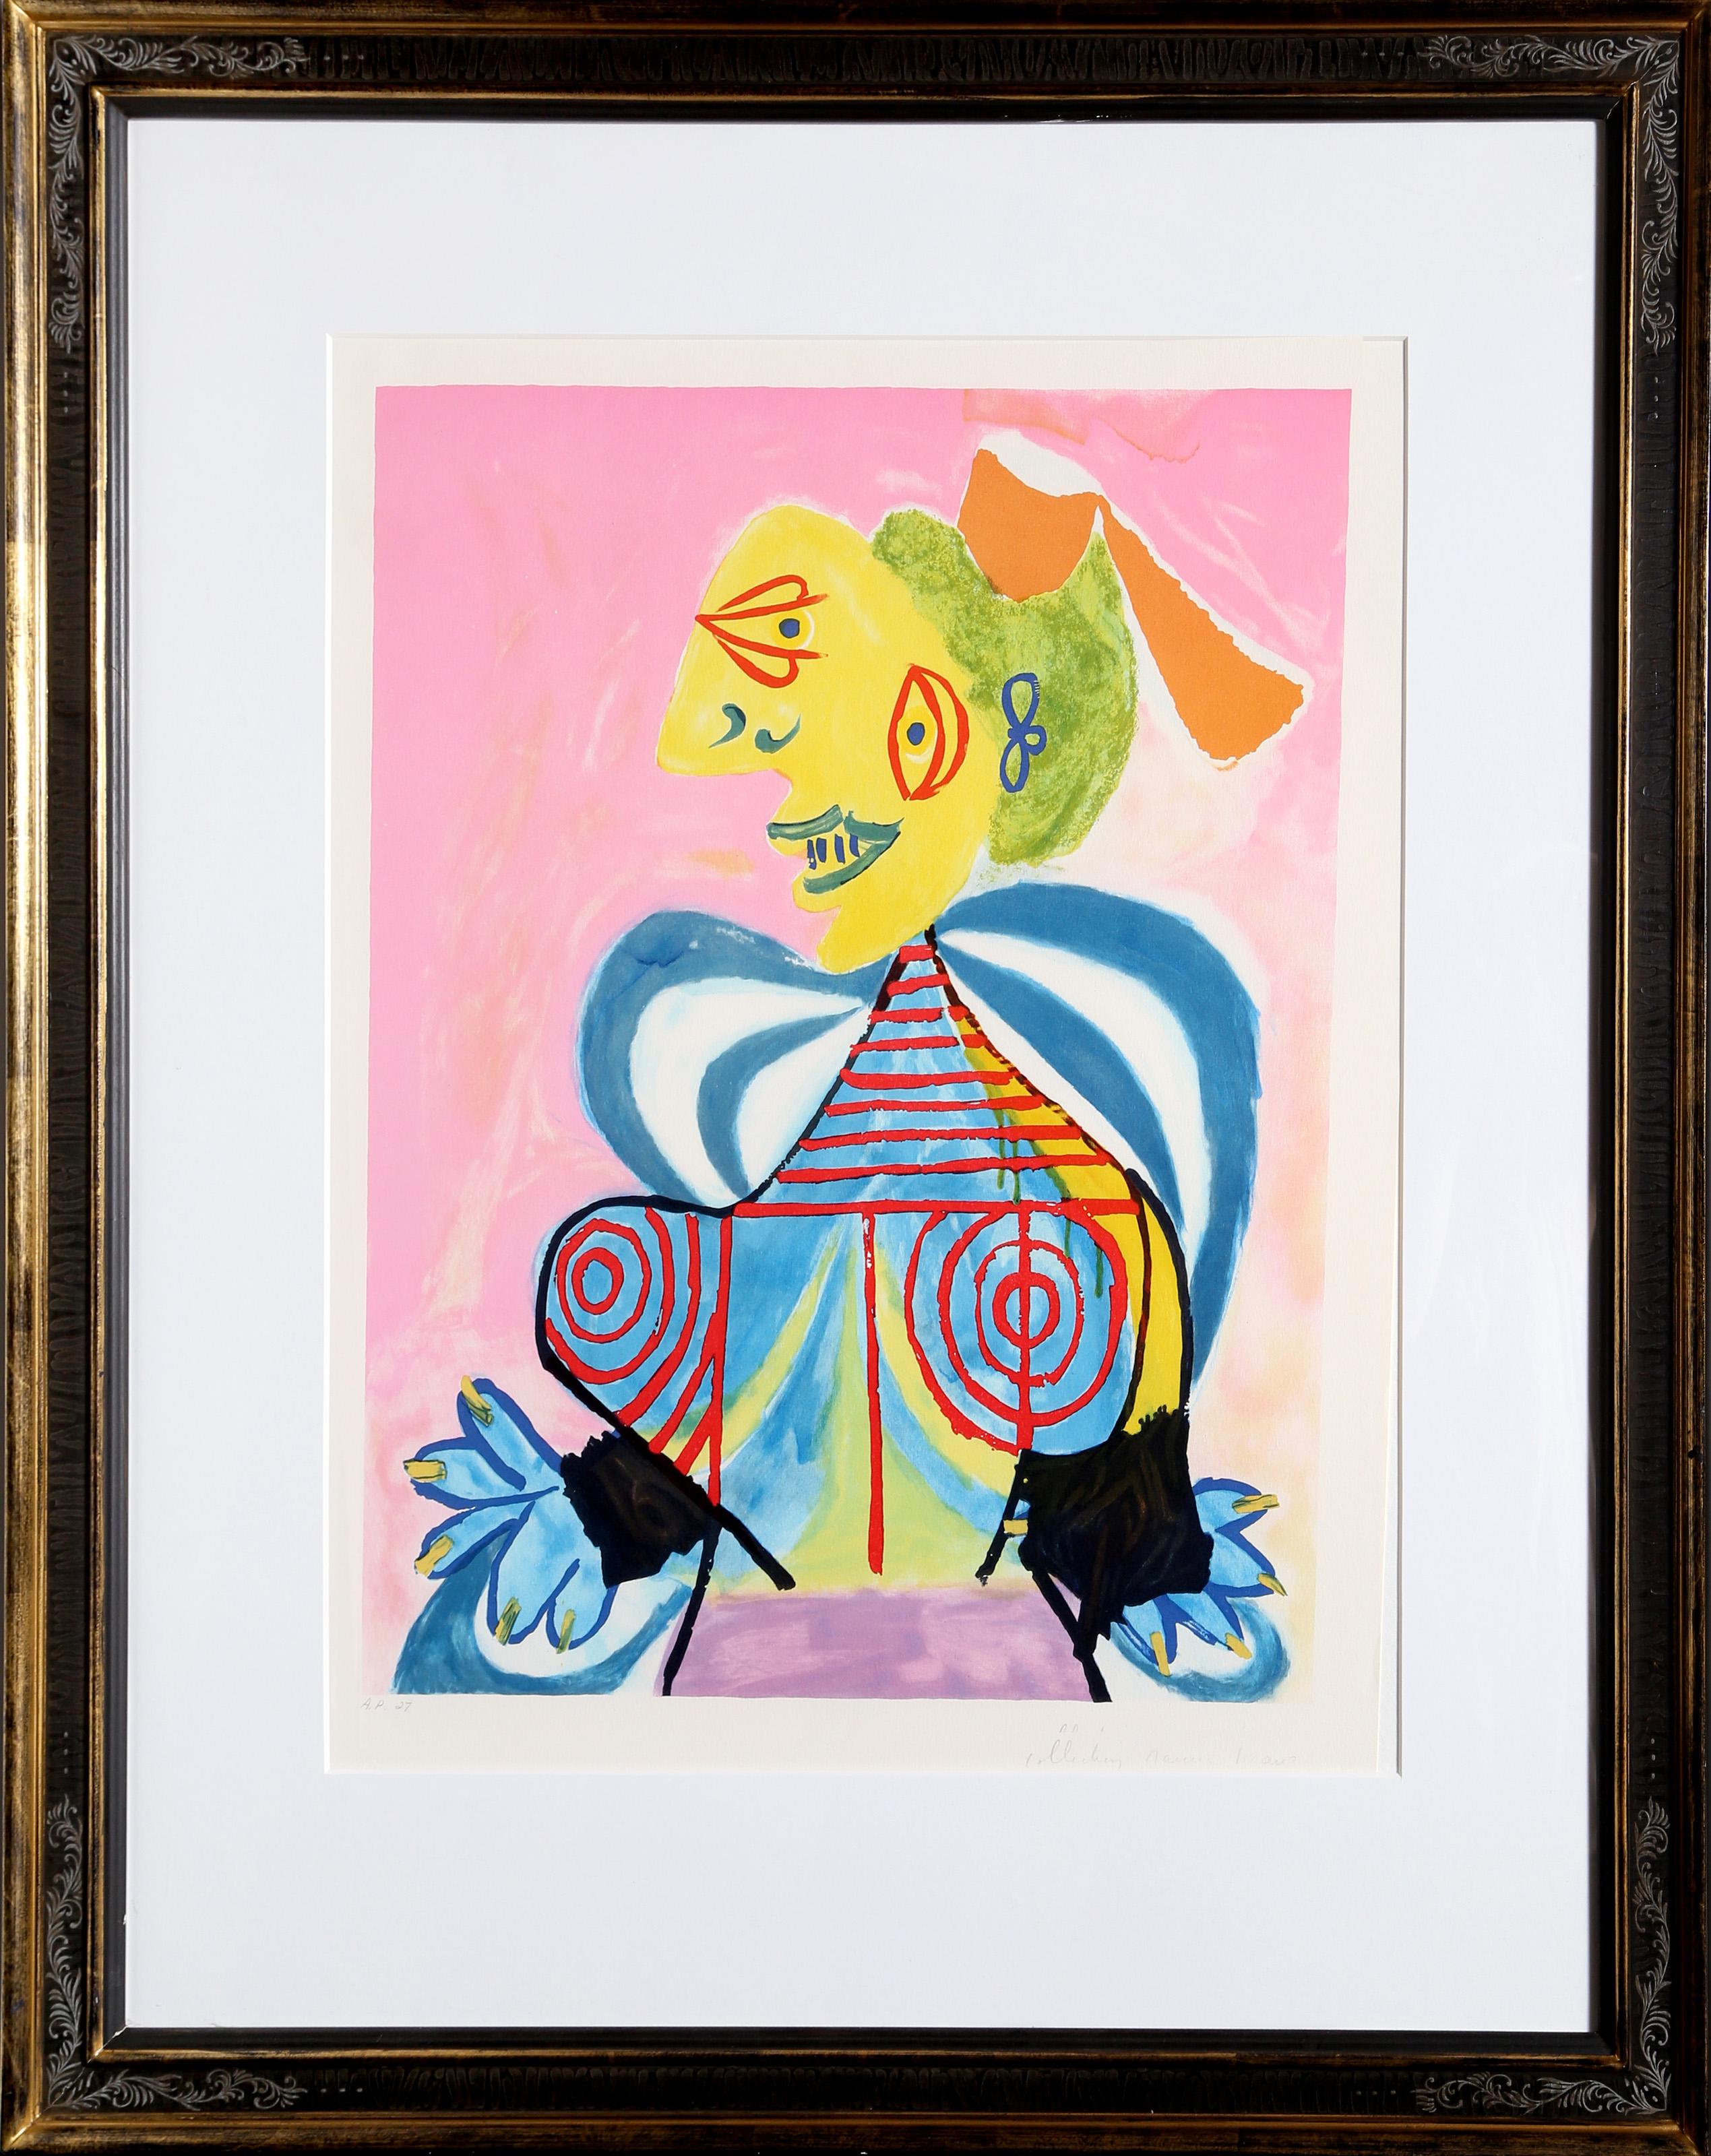 Pablo Picasso's depiction of a woman from Alès is bright and colorful, rendered in bright shades of pink, yellow, and blue. Shown in a Cubist style with her face and body fragmented, the woman is comprised of several rounded and curving forms that